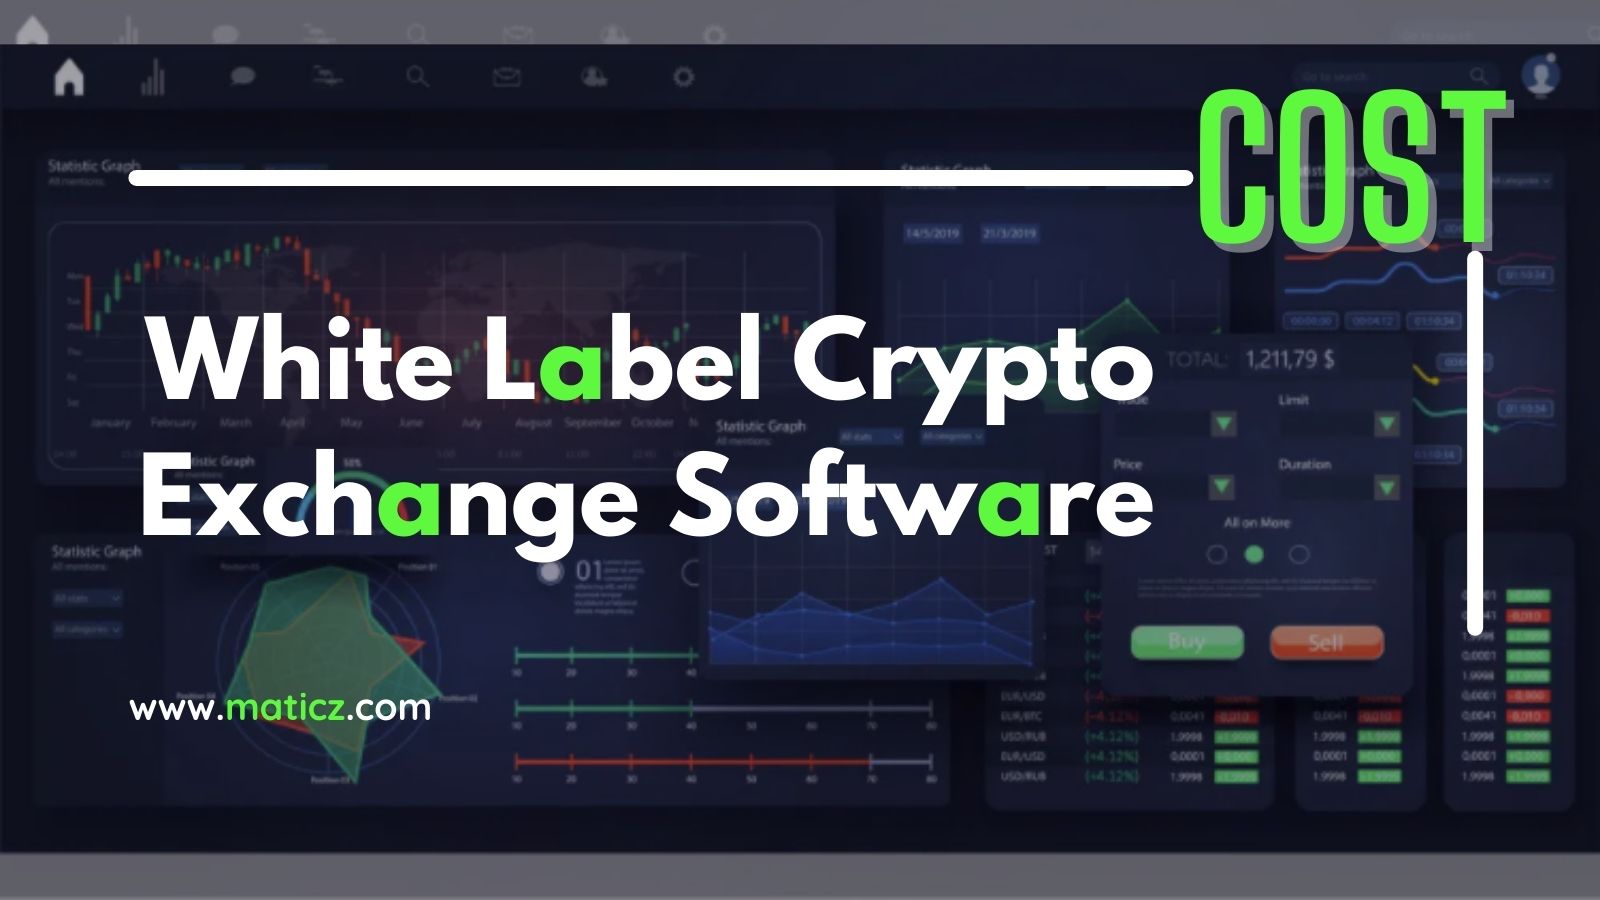 Article about Cost of White Label Crypto Exchange Software